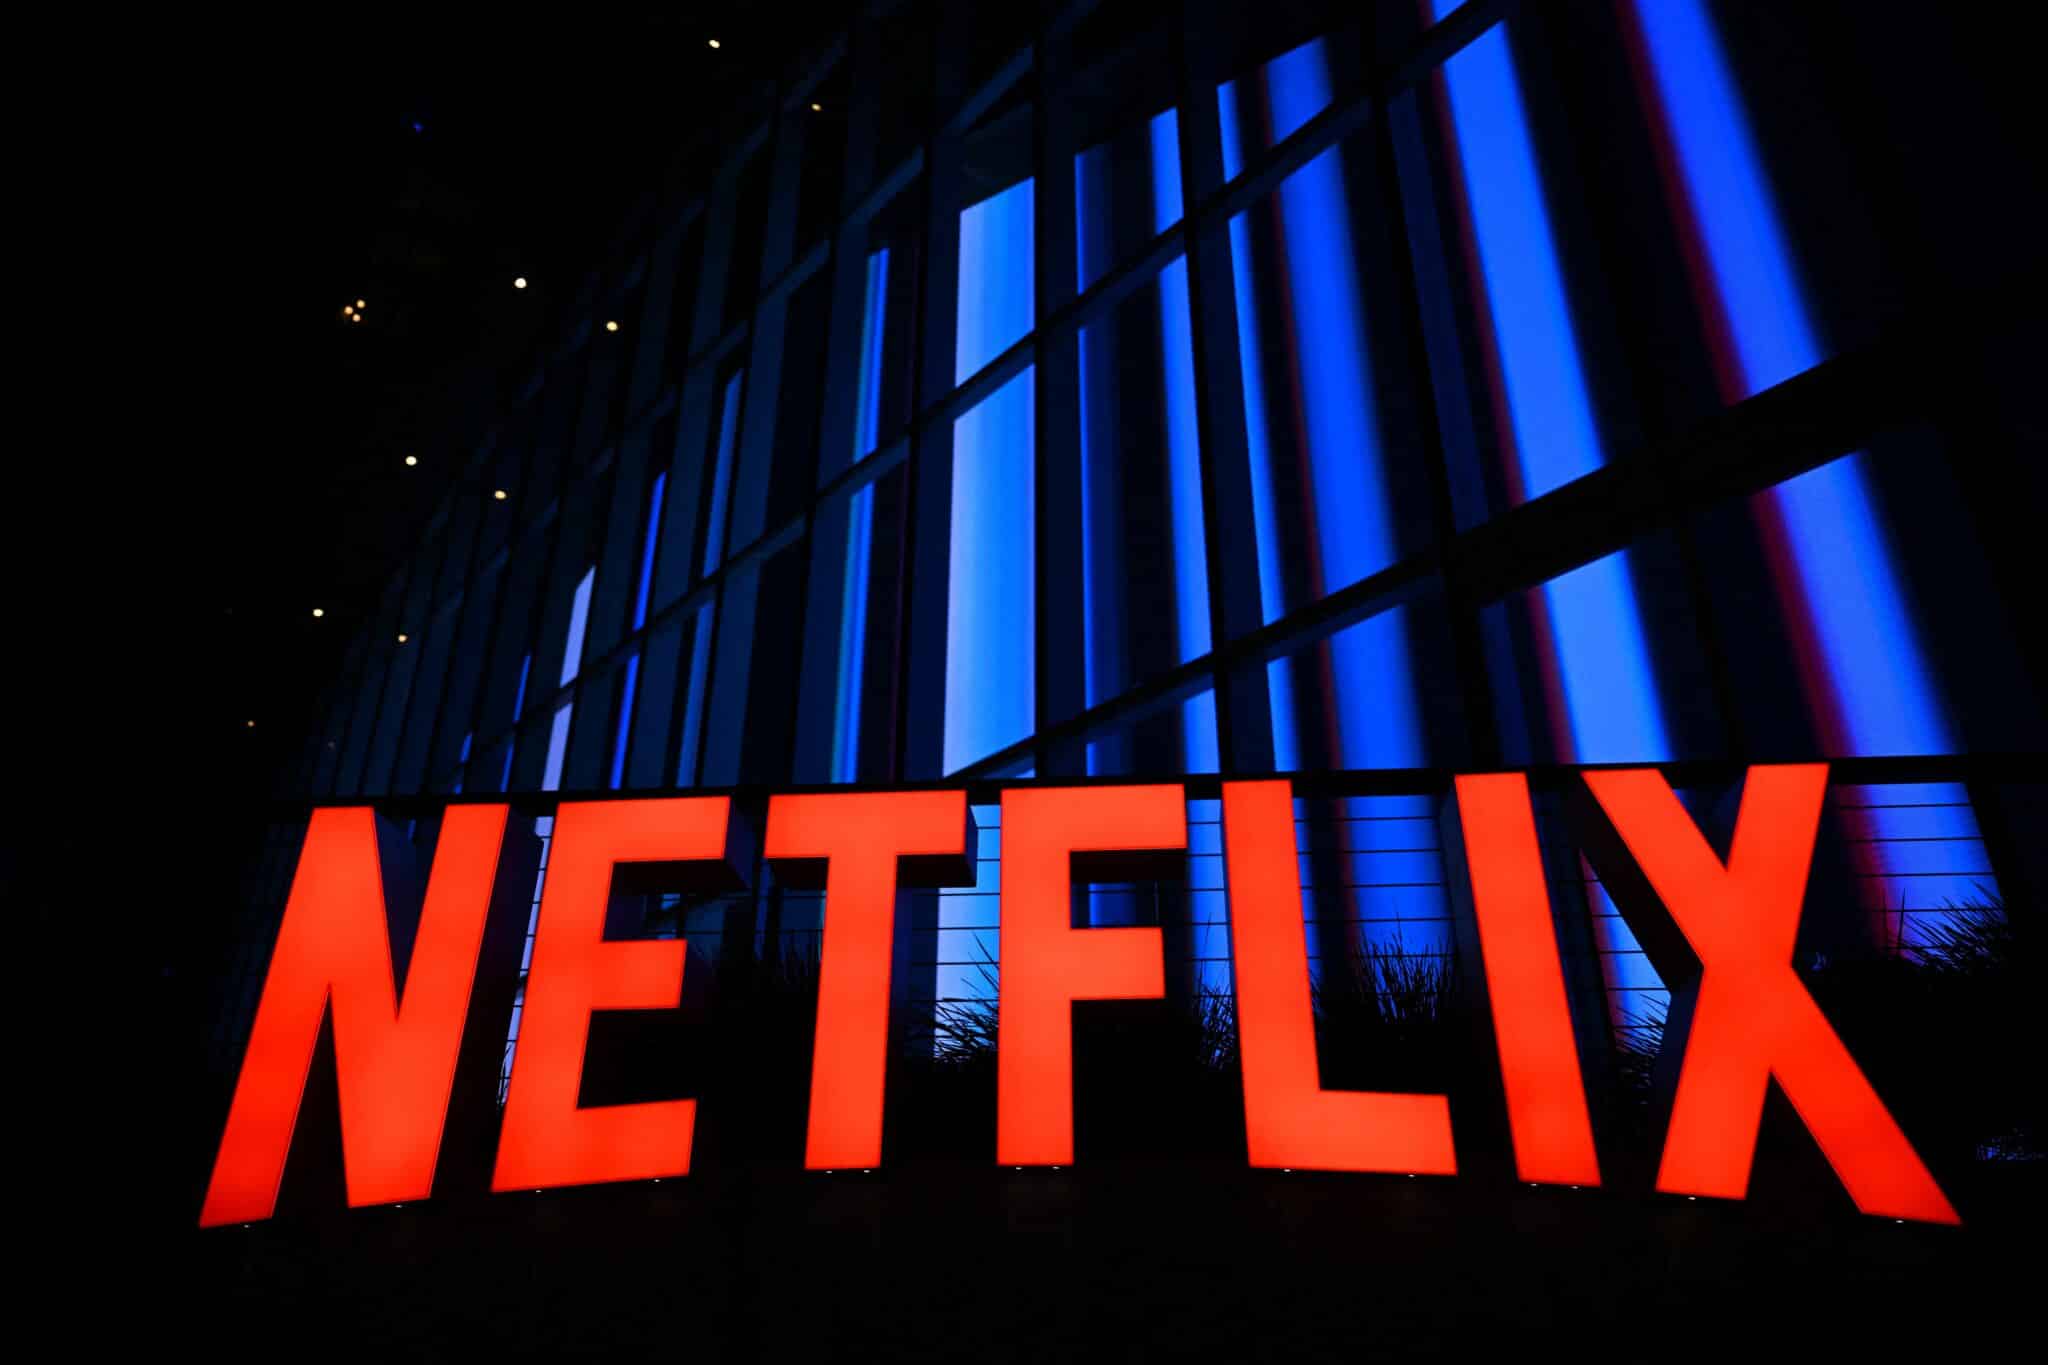 The Netflix logo is seen at the Netflix Tudum Theater in Los Angeles, California, on September 14, 2022. (Photo by Patrick T. FALLON / AFP) (Photo by PATRICK T. FALLON/AFP via Getty Images)